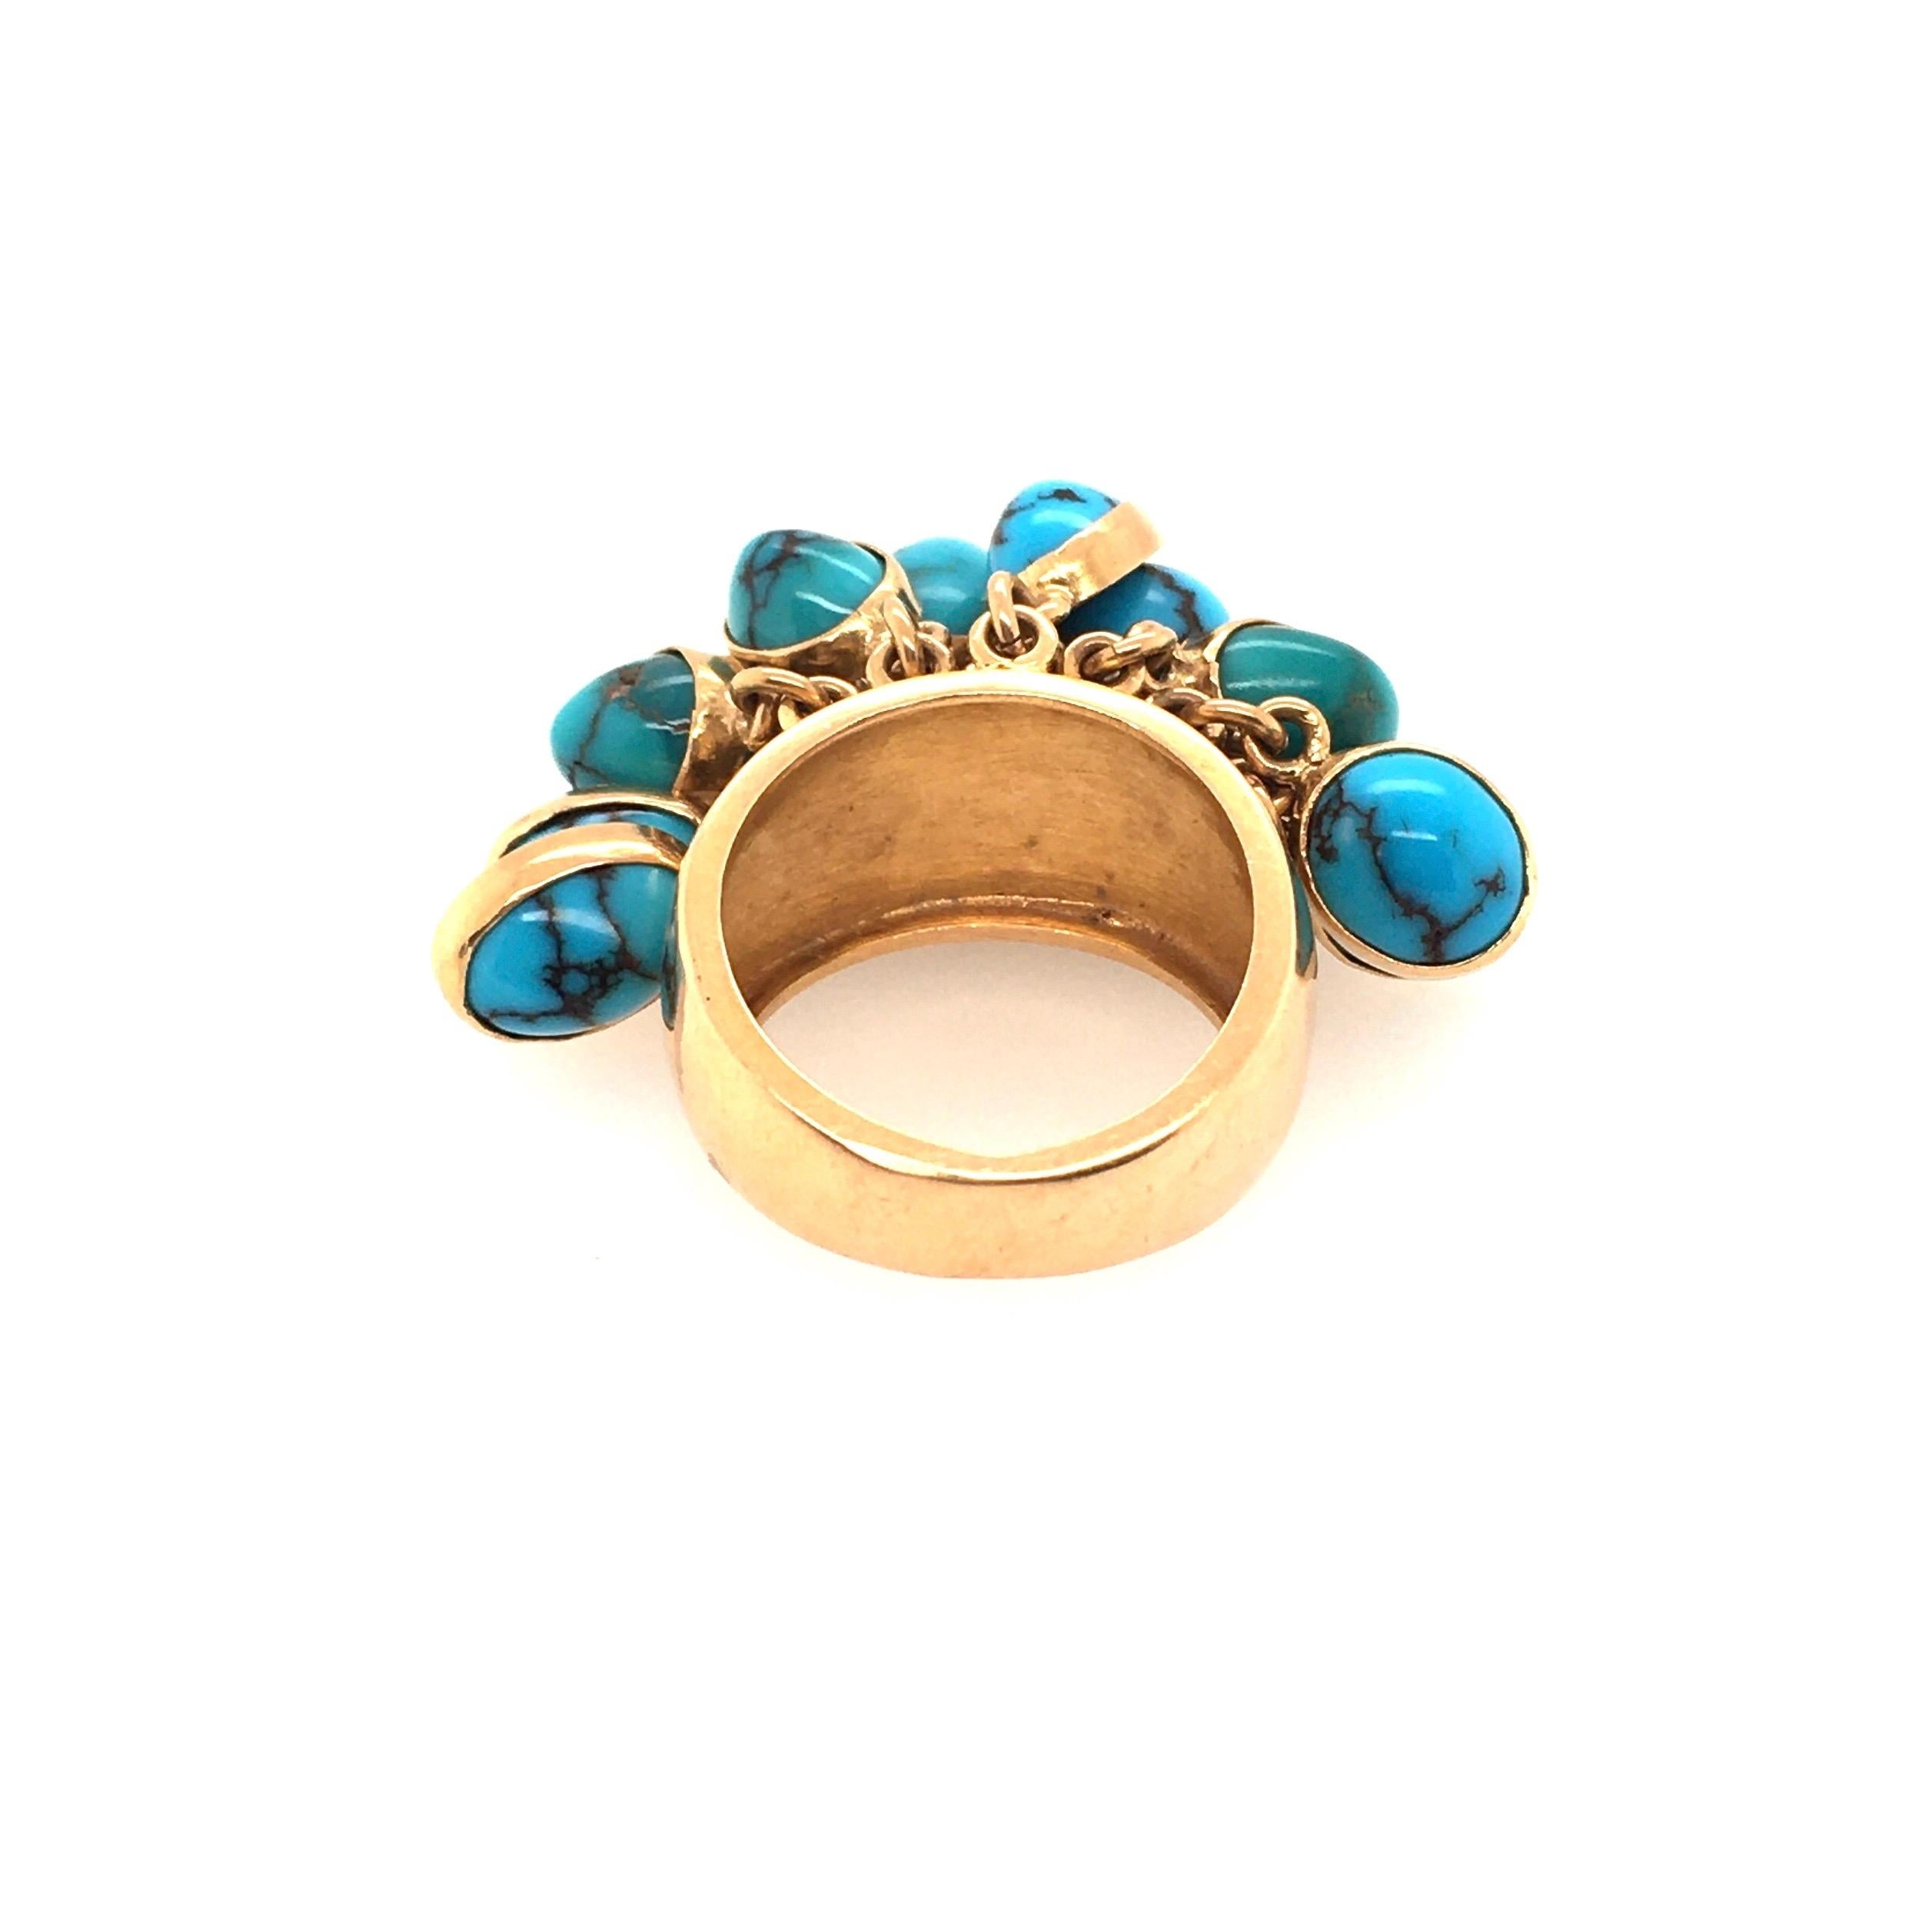 Women's or Men's Gold and Turquoise Ring